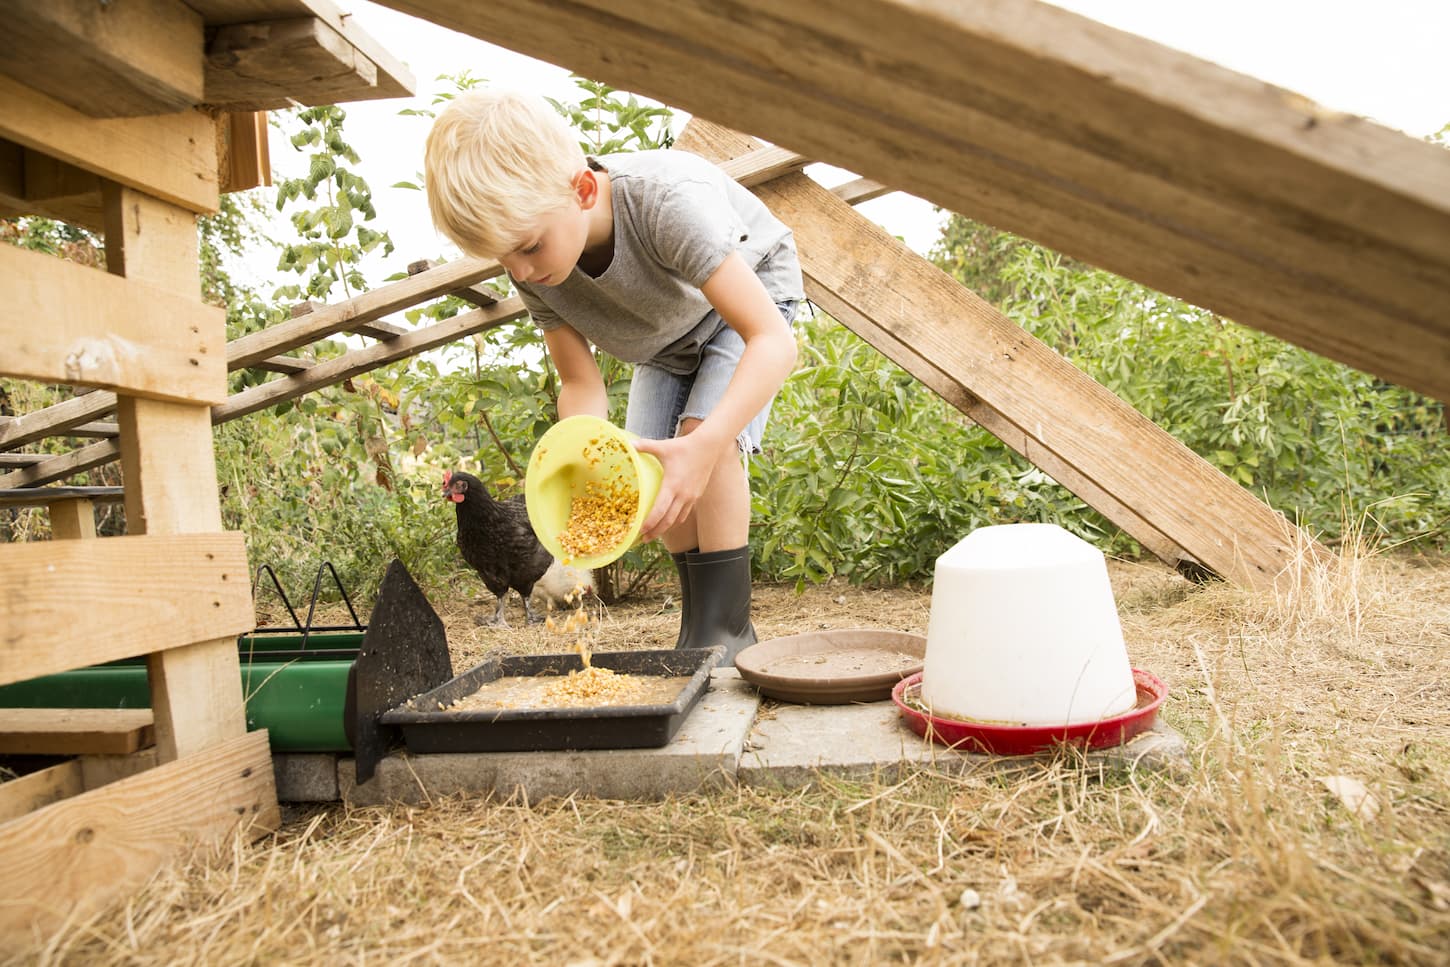 An image of a boy feeding chicken at chickenhouse in the garden.